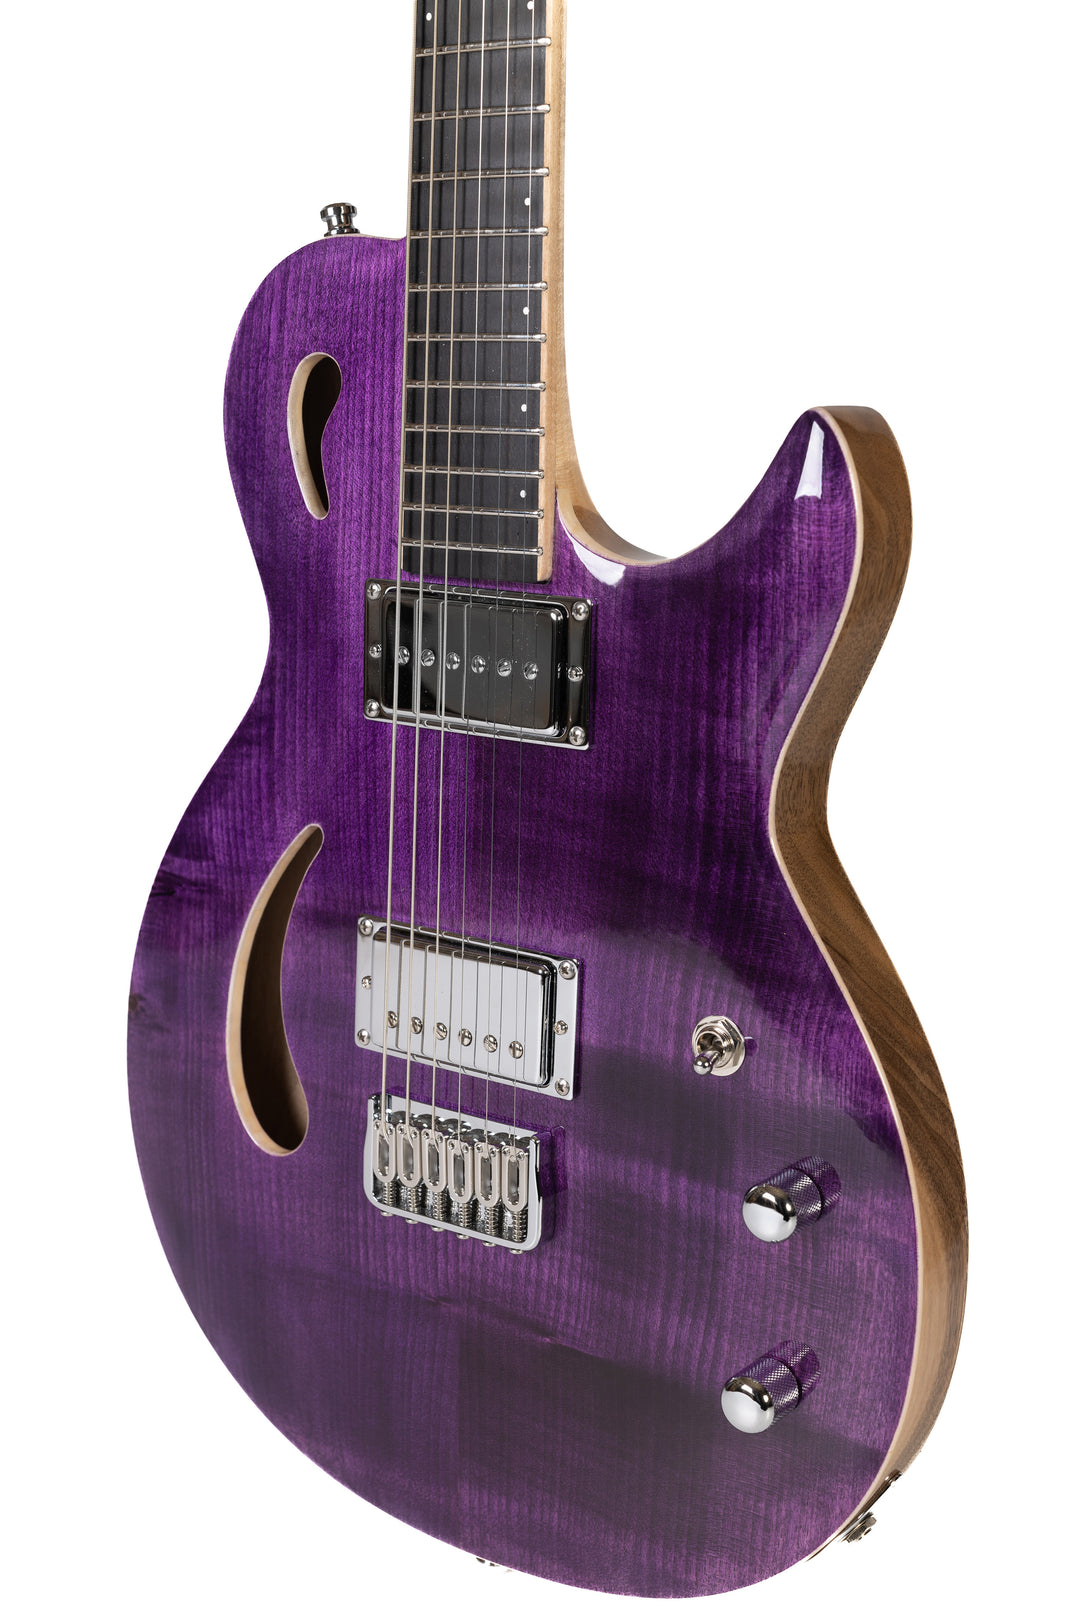      Nina_Guitar_Lavender_fields_of_Provence_Glossy_Close_up_side_1_De_Leeuw_Guitars_Paris_Made_in_France_Luthier_Guitar_Maker_France_Neck_Through_Manche_Traversant